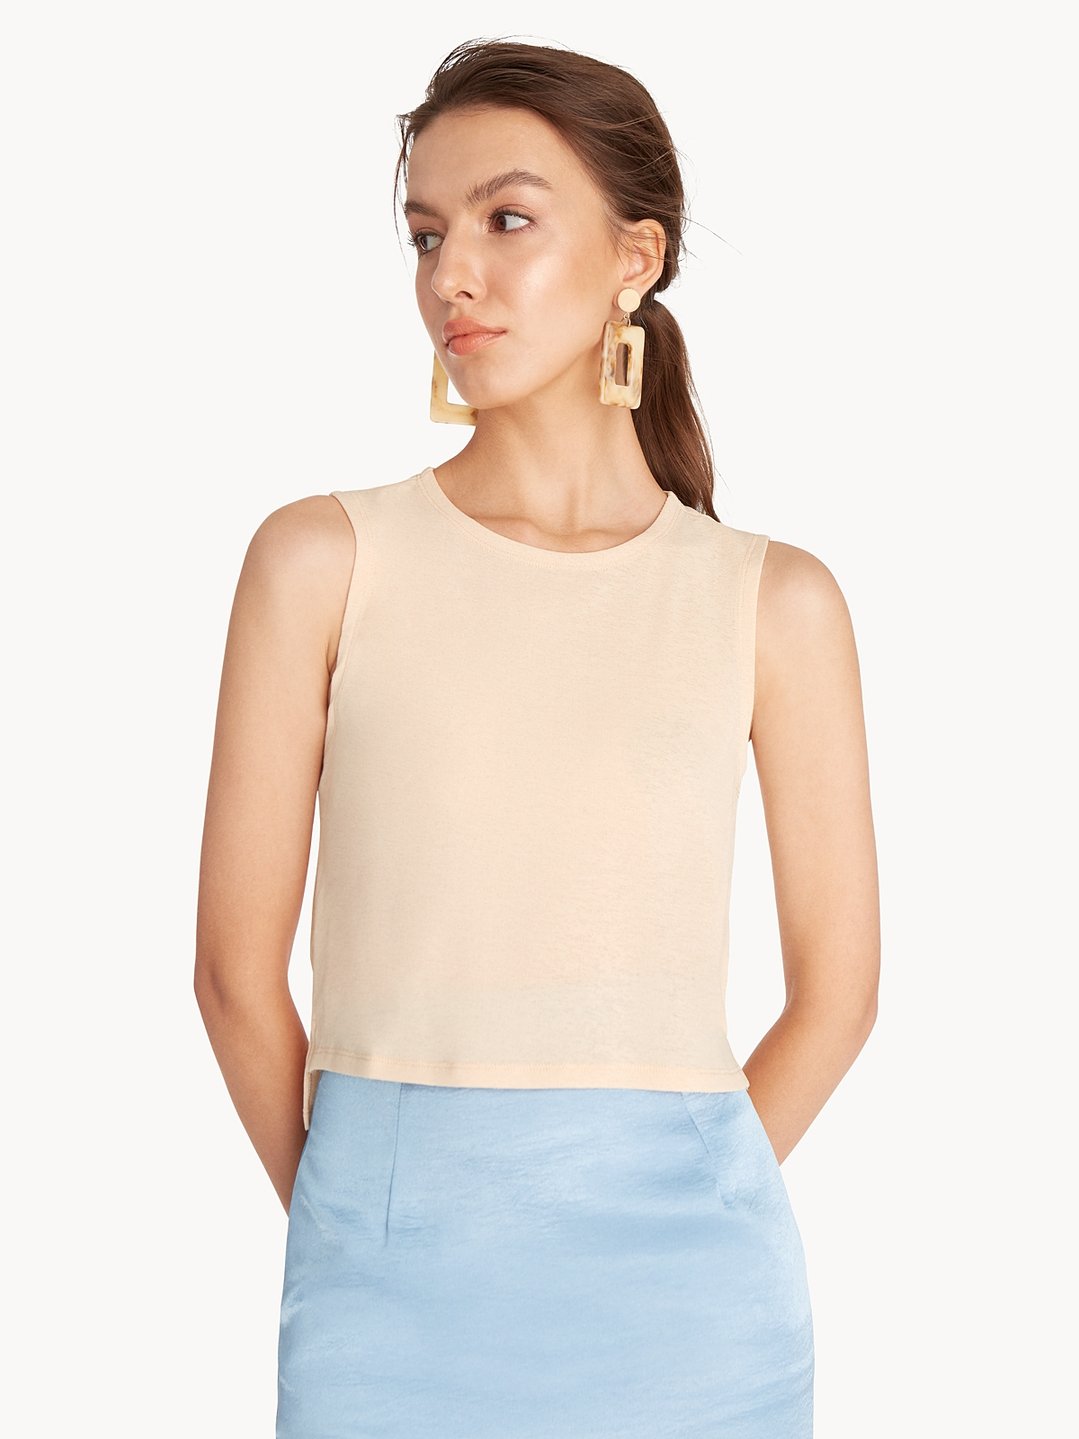 Crop Sleeveless Fitted Top - Beige - Pomelo Fashion